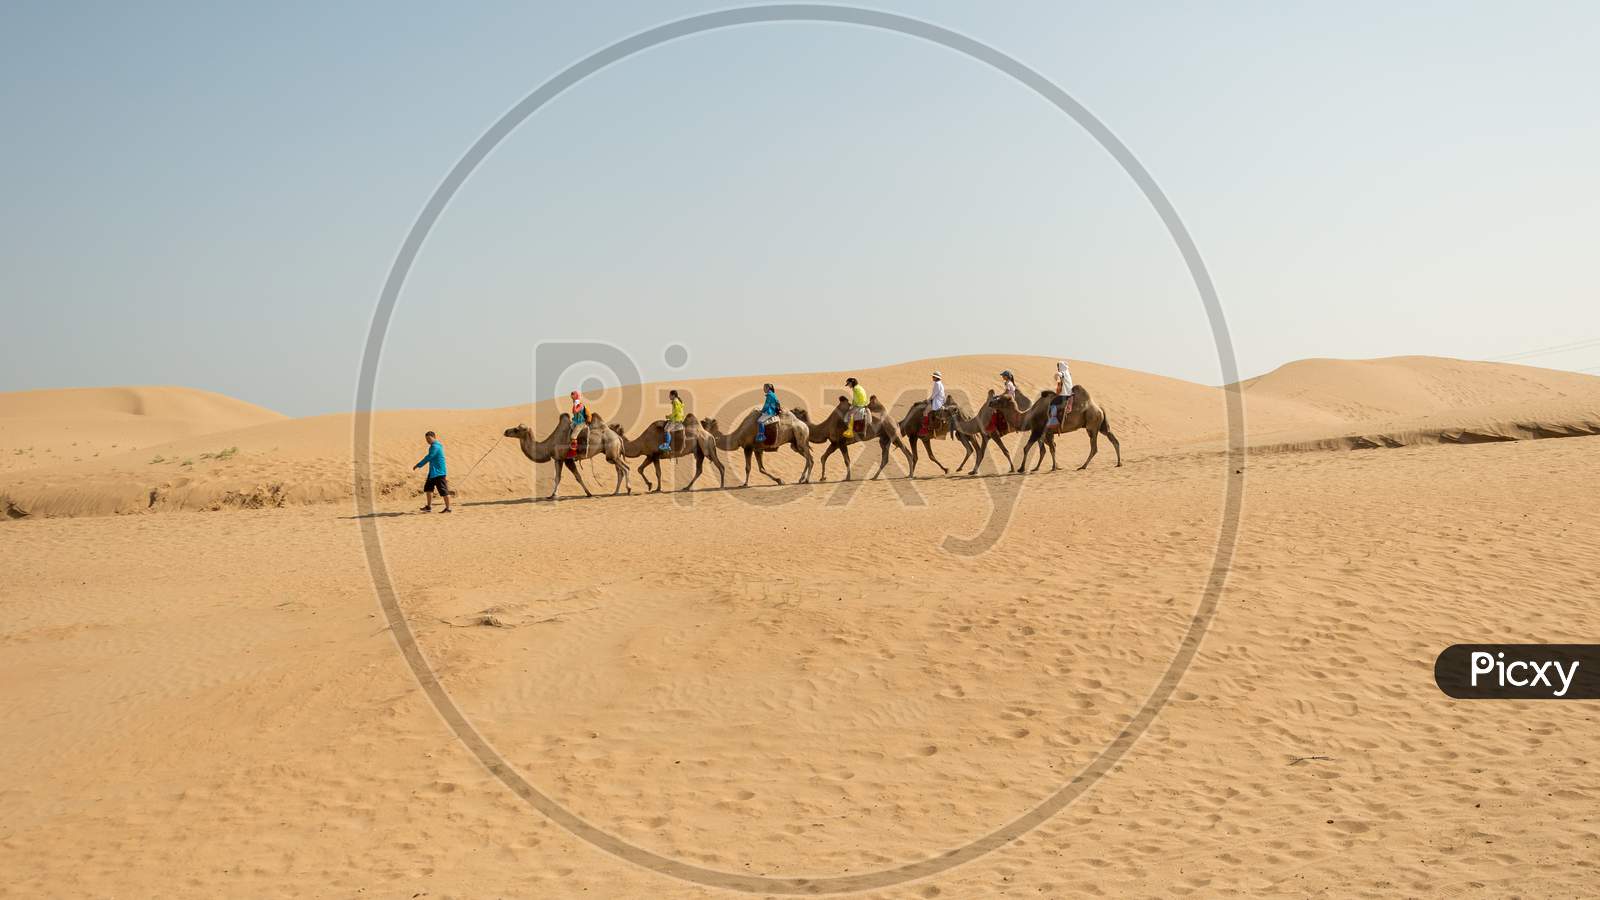 Guide Taking Tourists On Two-Humped Bactrian Camels In Kubuqi Desert In Northern China